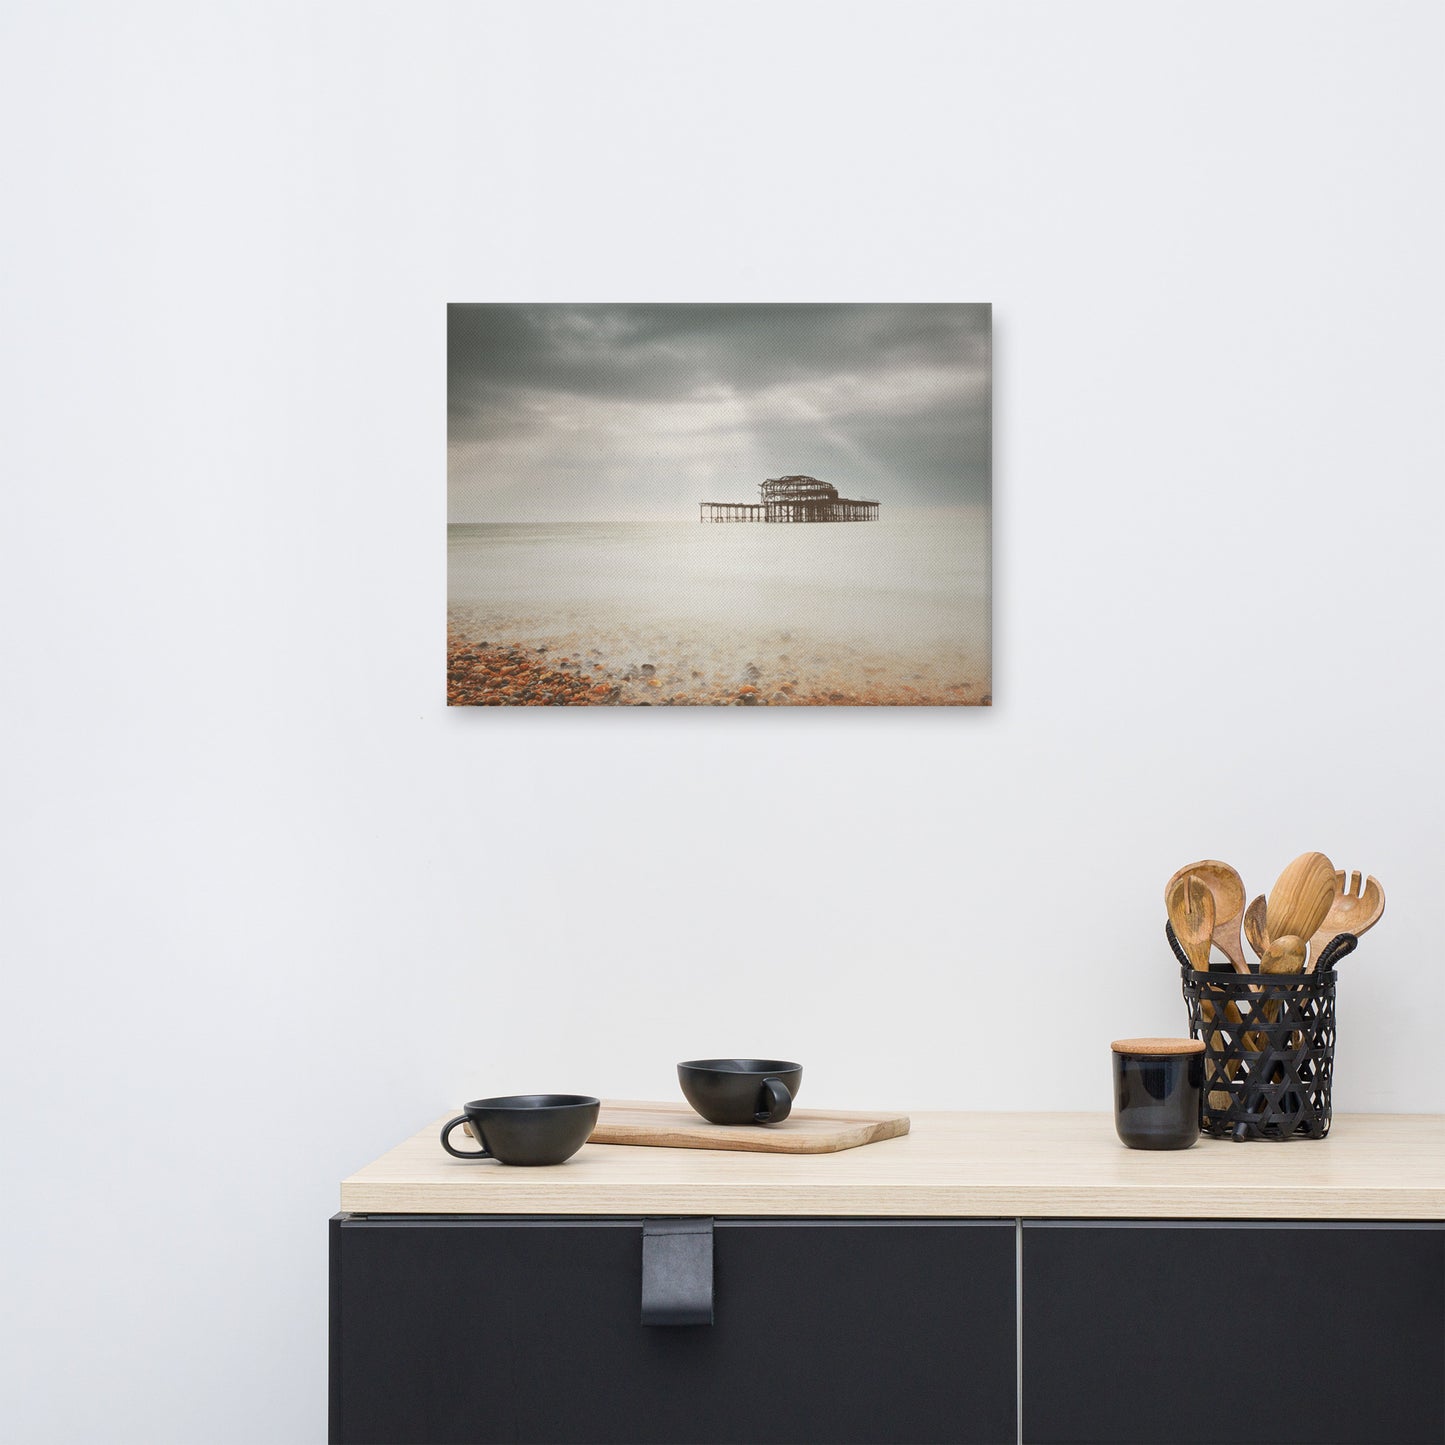 Wall Canvas For Dining Room: Abandoned West Pier Warming Matte Effect - Coastal / Seascape / Nature / Landscape Photo Wall Art - Wall Decor - Artwork